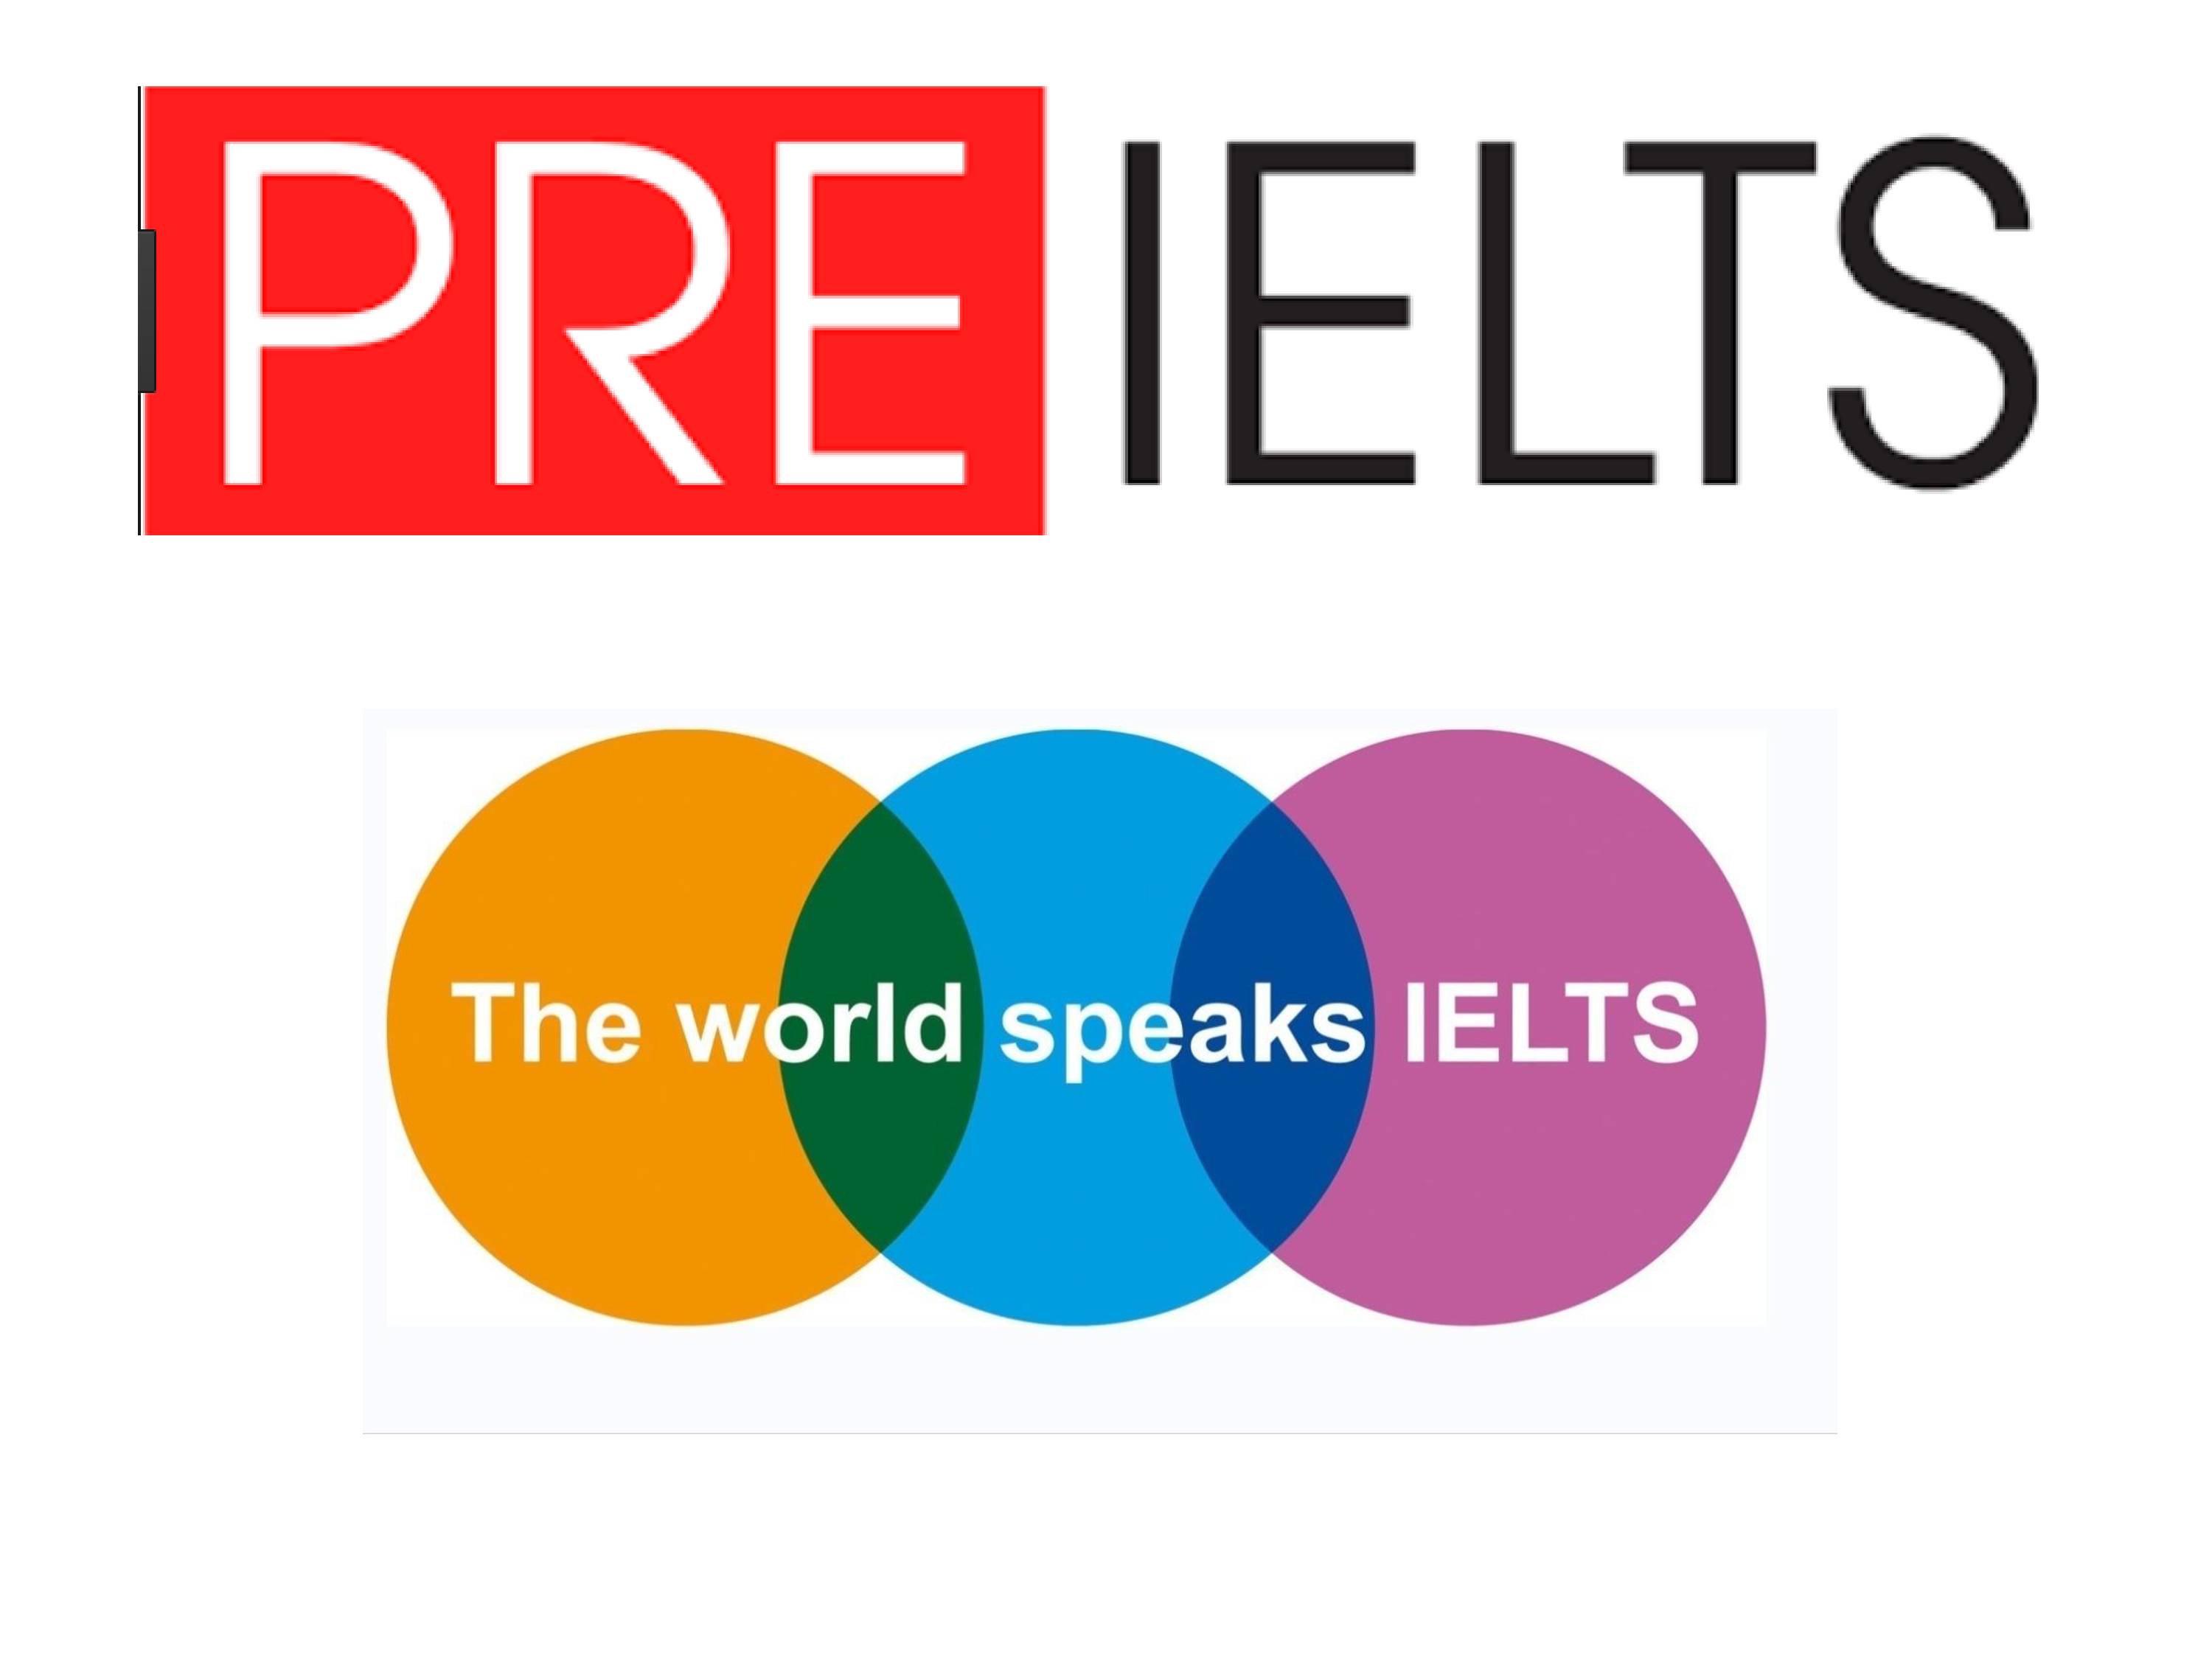 PPT to understand the IELTS graph